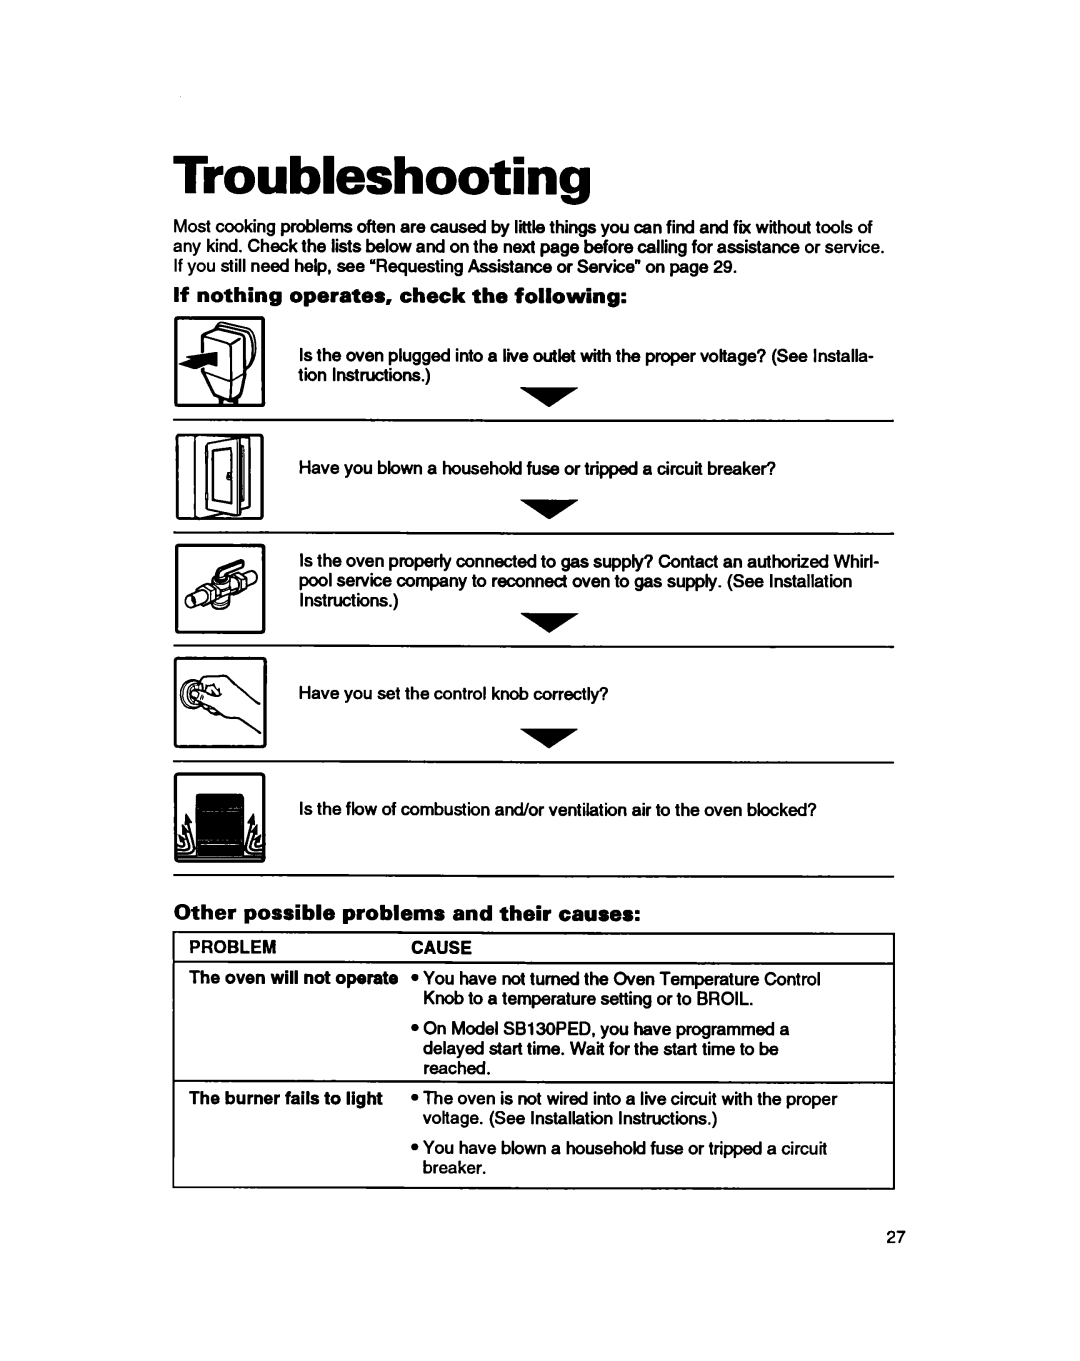 Whirlpool SBIOOPED Troubleshooting, If nothing operates, check the following, Other possible problems and their causes 